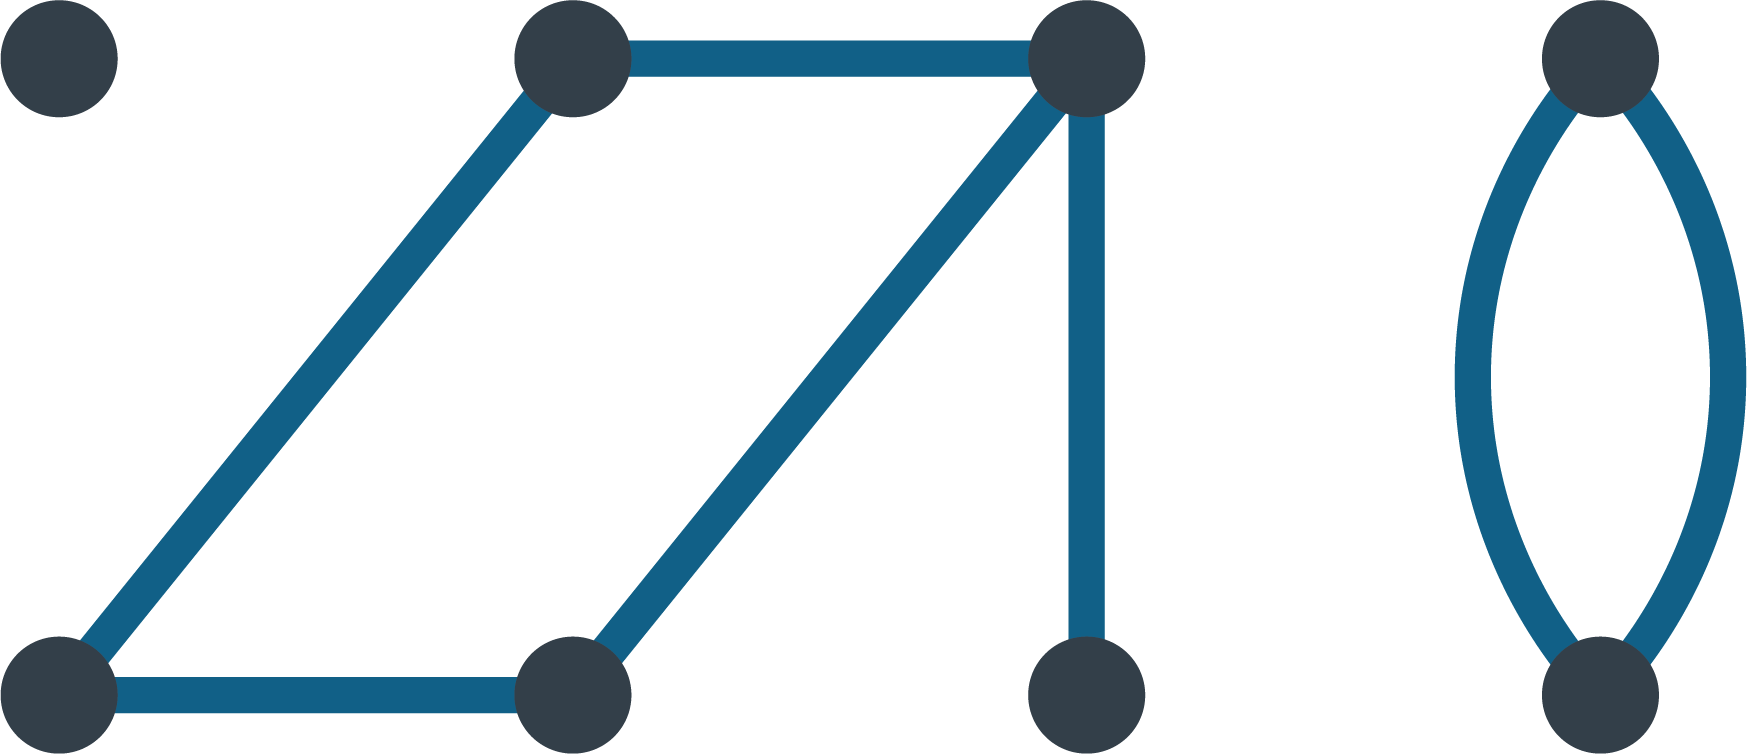 Three piece graph, left piece is an isolated vertex. Center piece is five vertices, a square graph with a fifth vertex connected to one of the other four. Third piece is a pair of vertices joined by two edges.